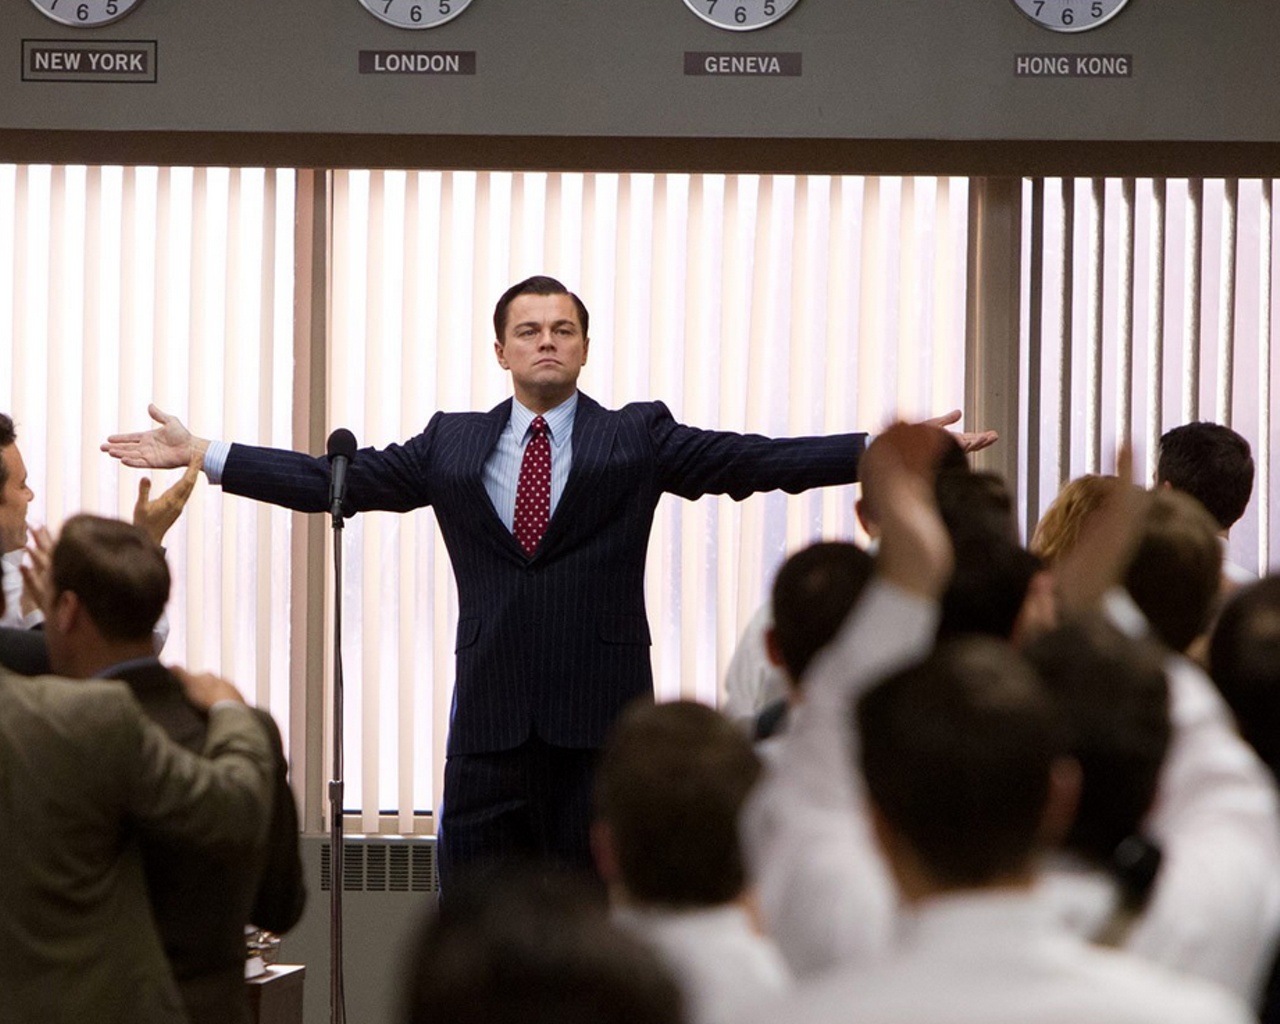 17. The Wolf of Wall Street
Pictured: Leonardo DiCaprio